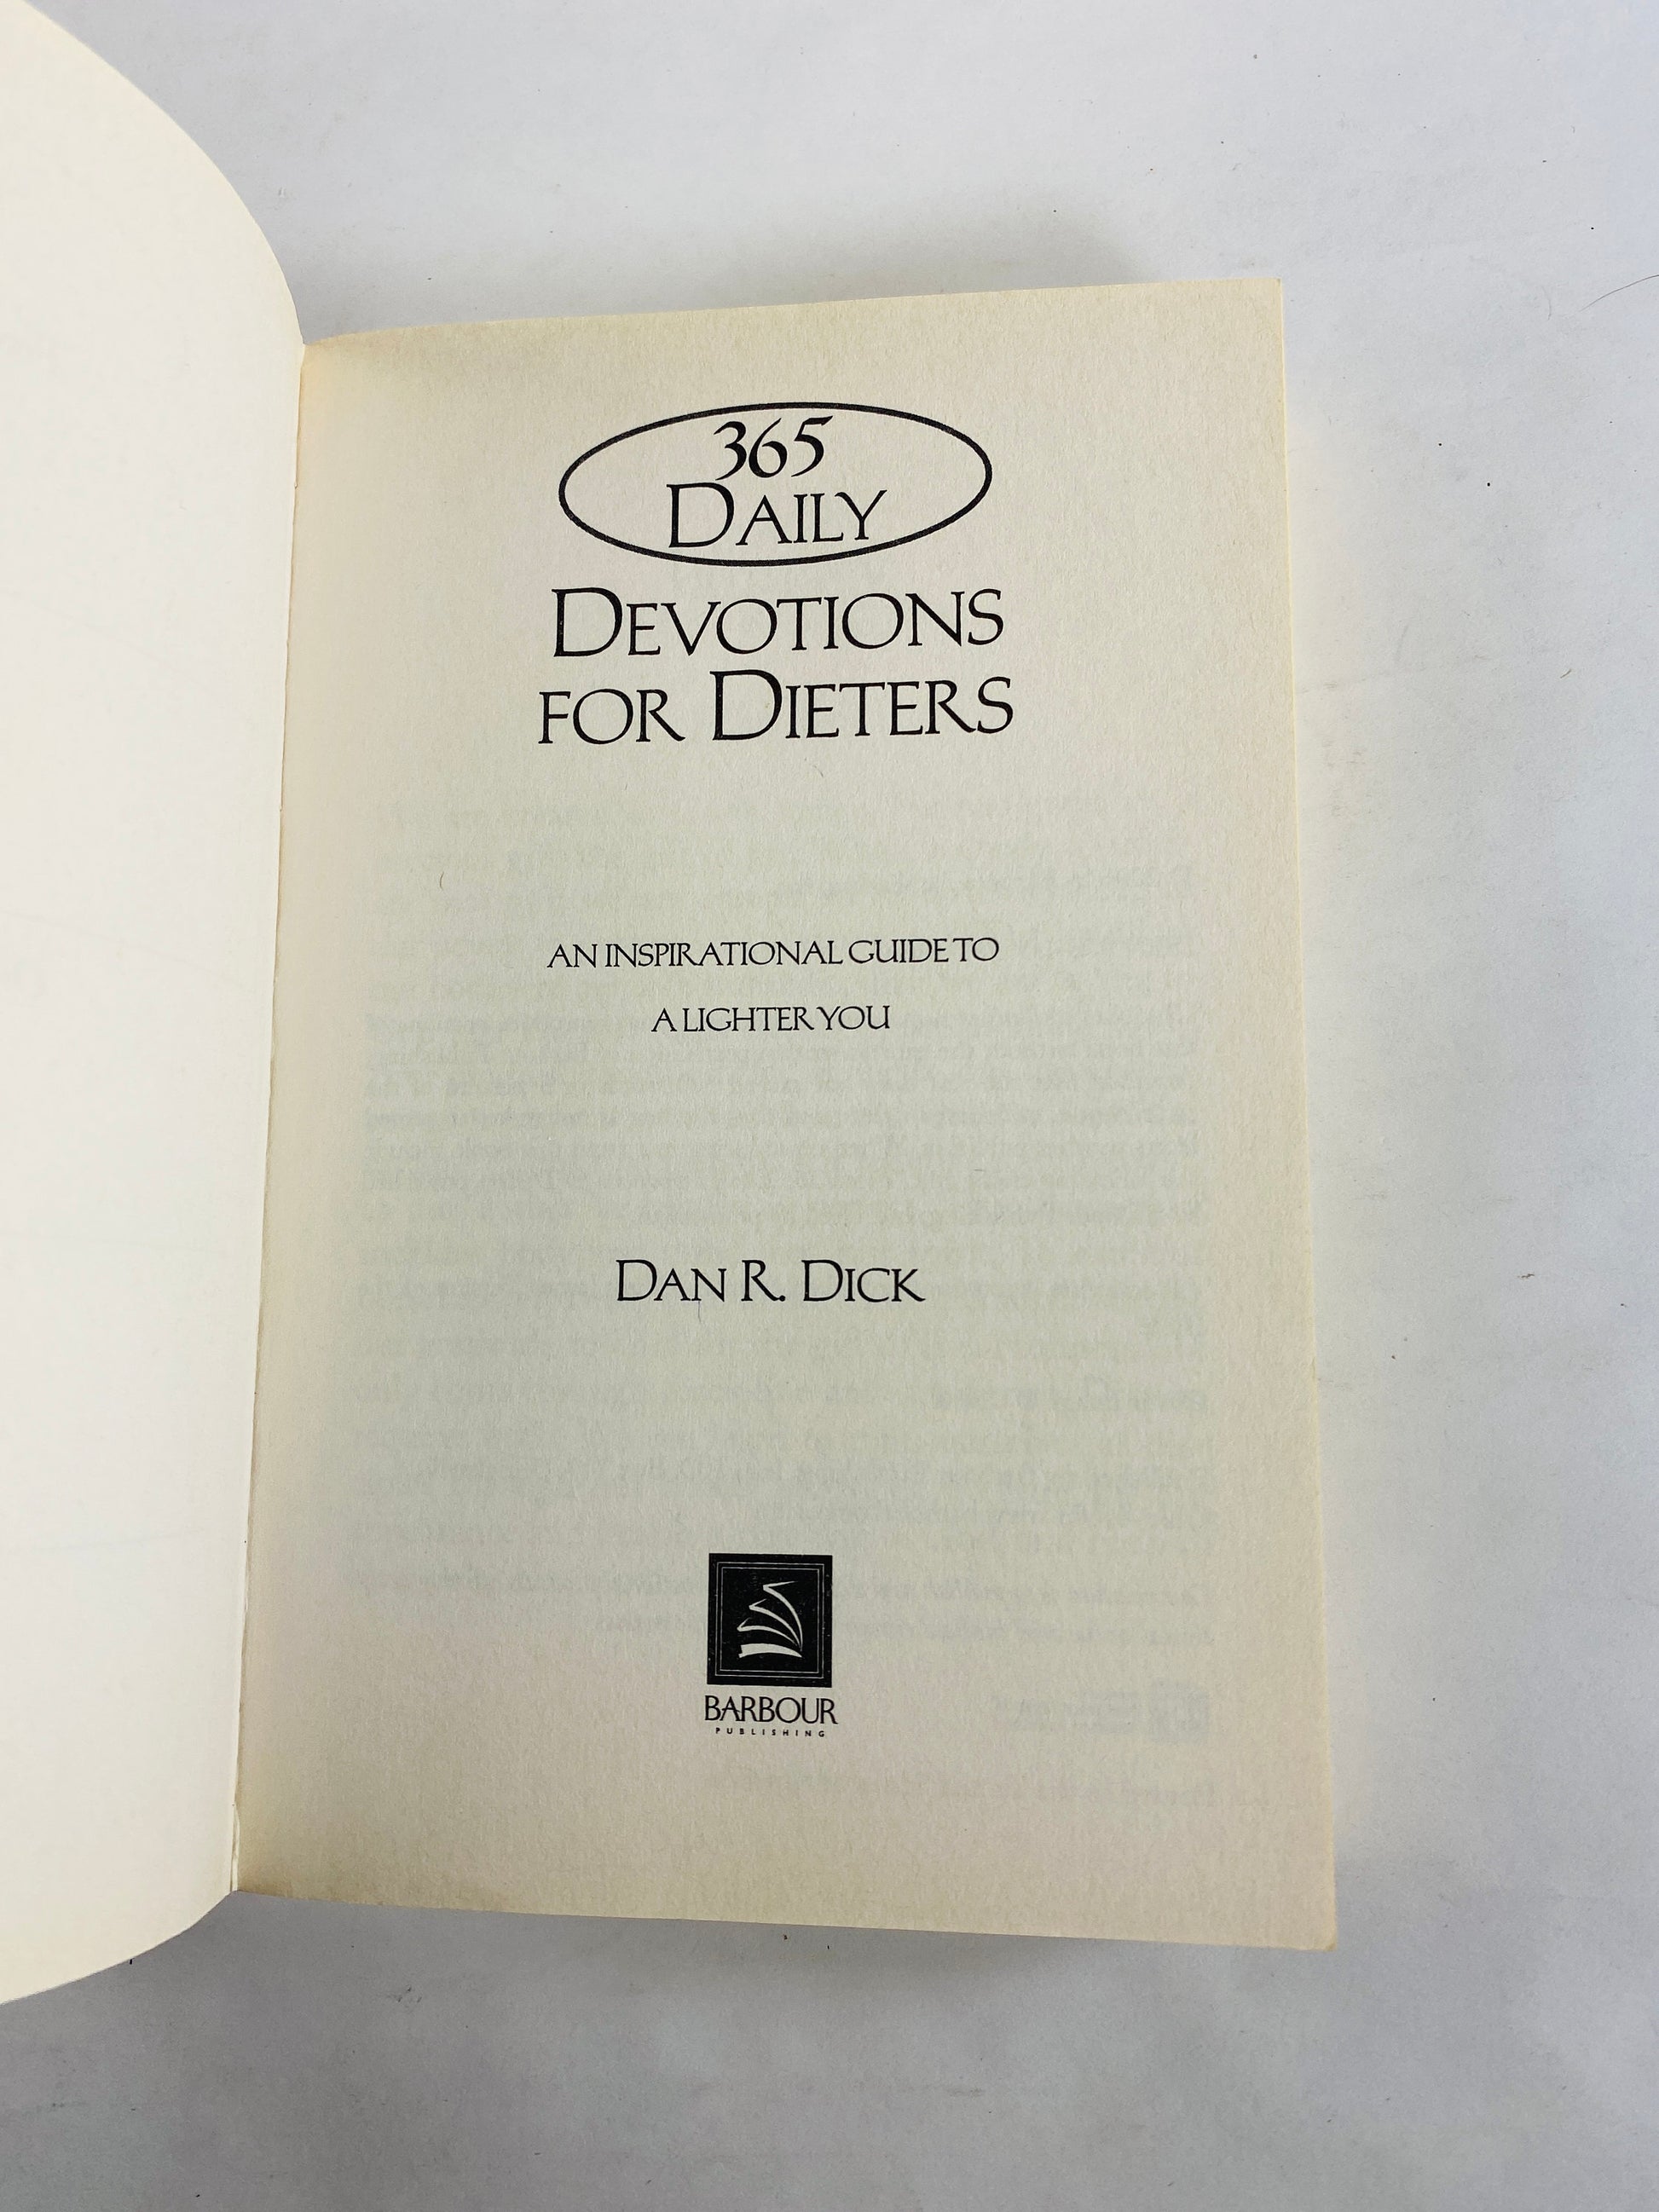 Daily Devotions for Dieters vintage paperback book with Christian inspirations for weight loss and strength motivation.